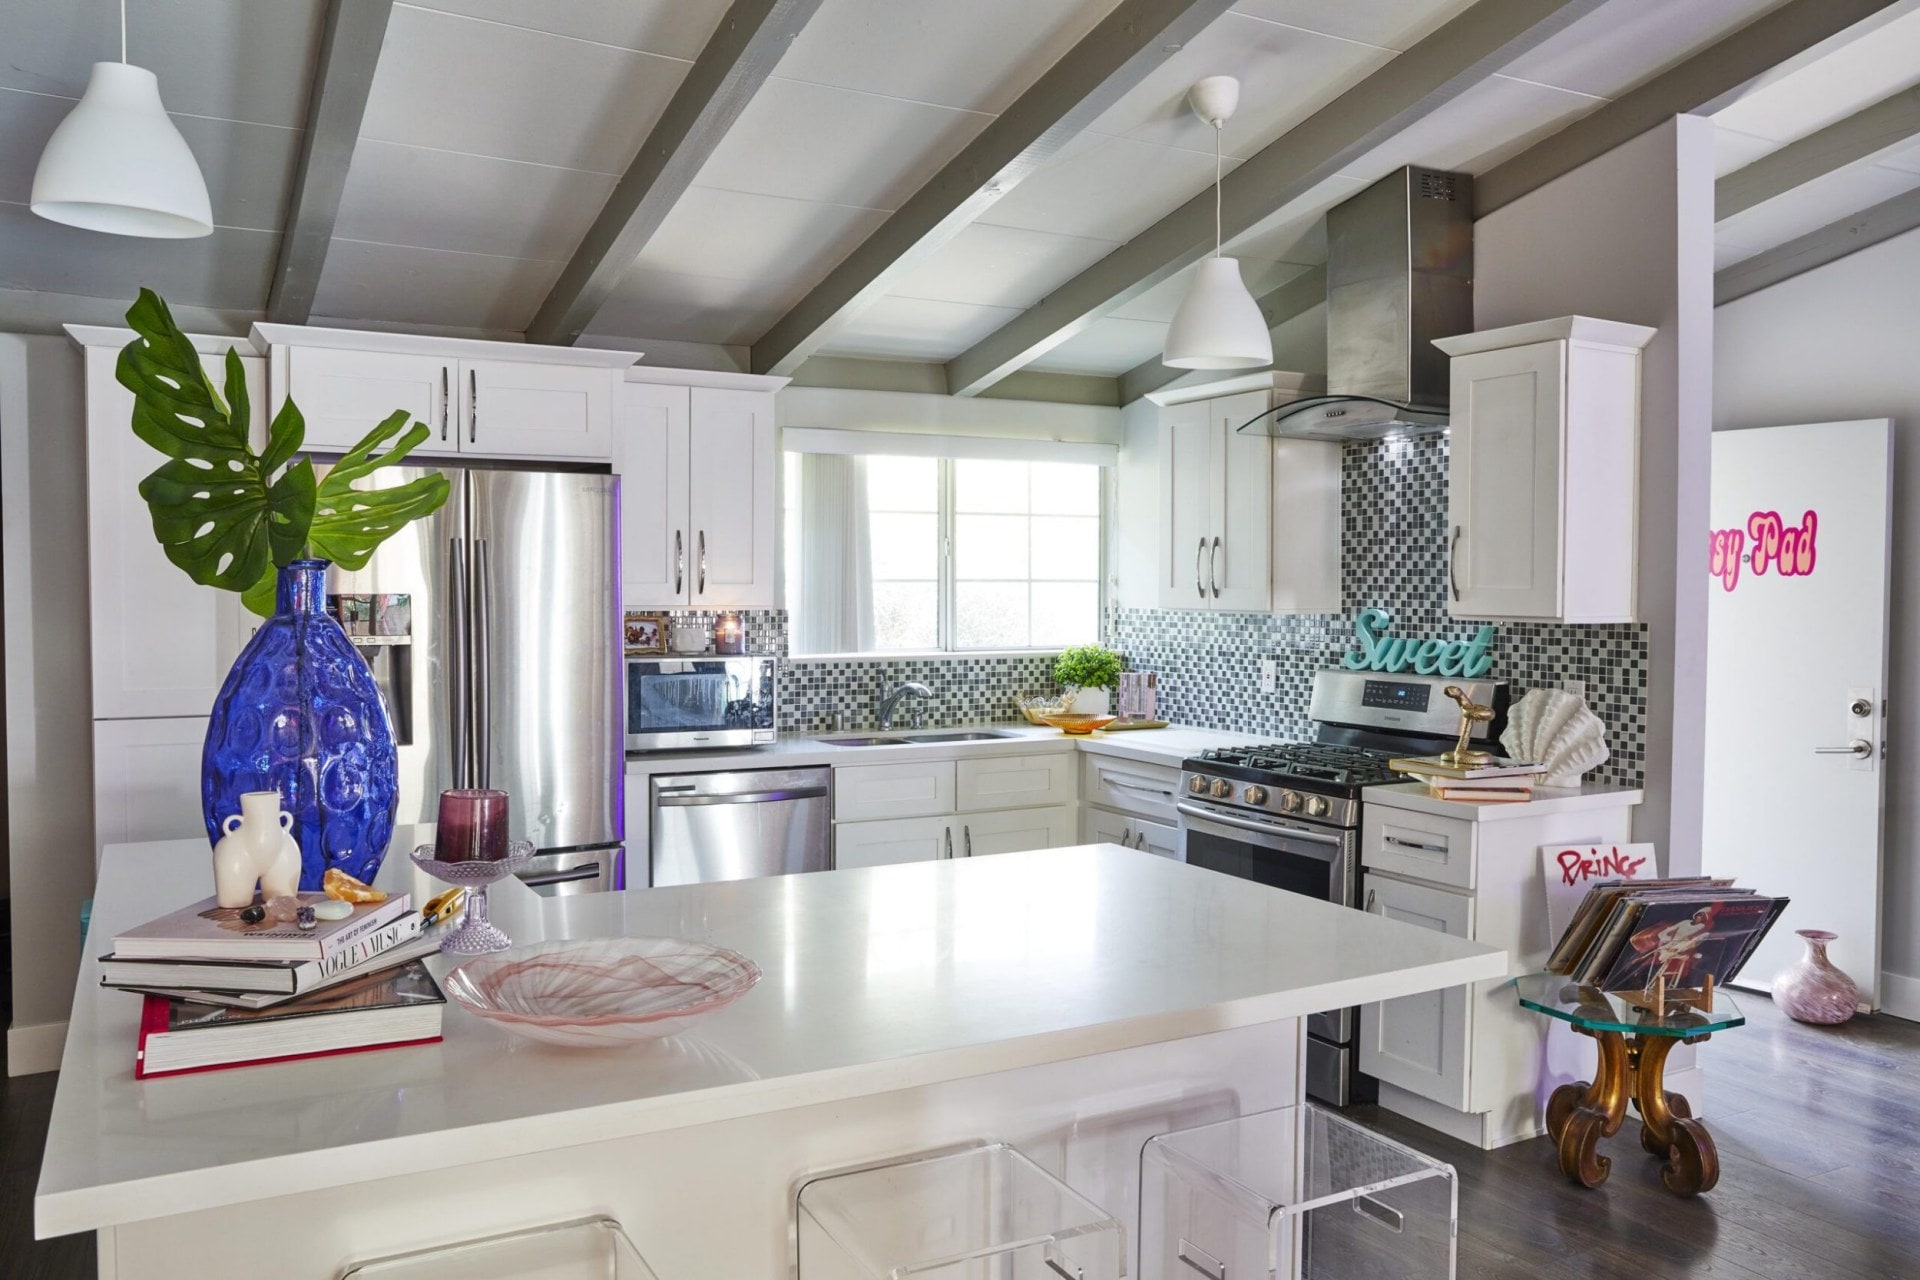 Parris Goebel home kitchen with white marble benchtops, arched ceilings and checkered tile splashbacks